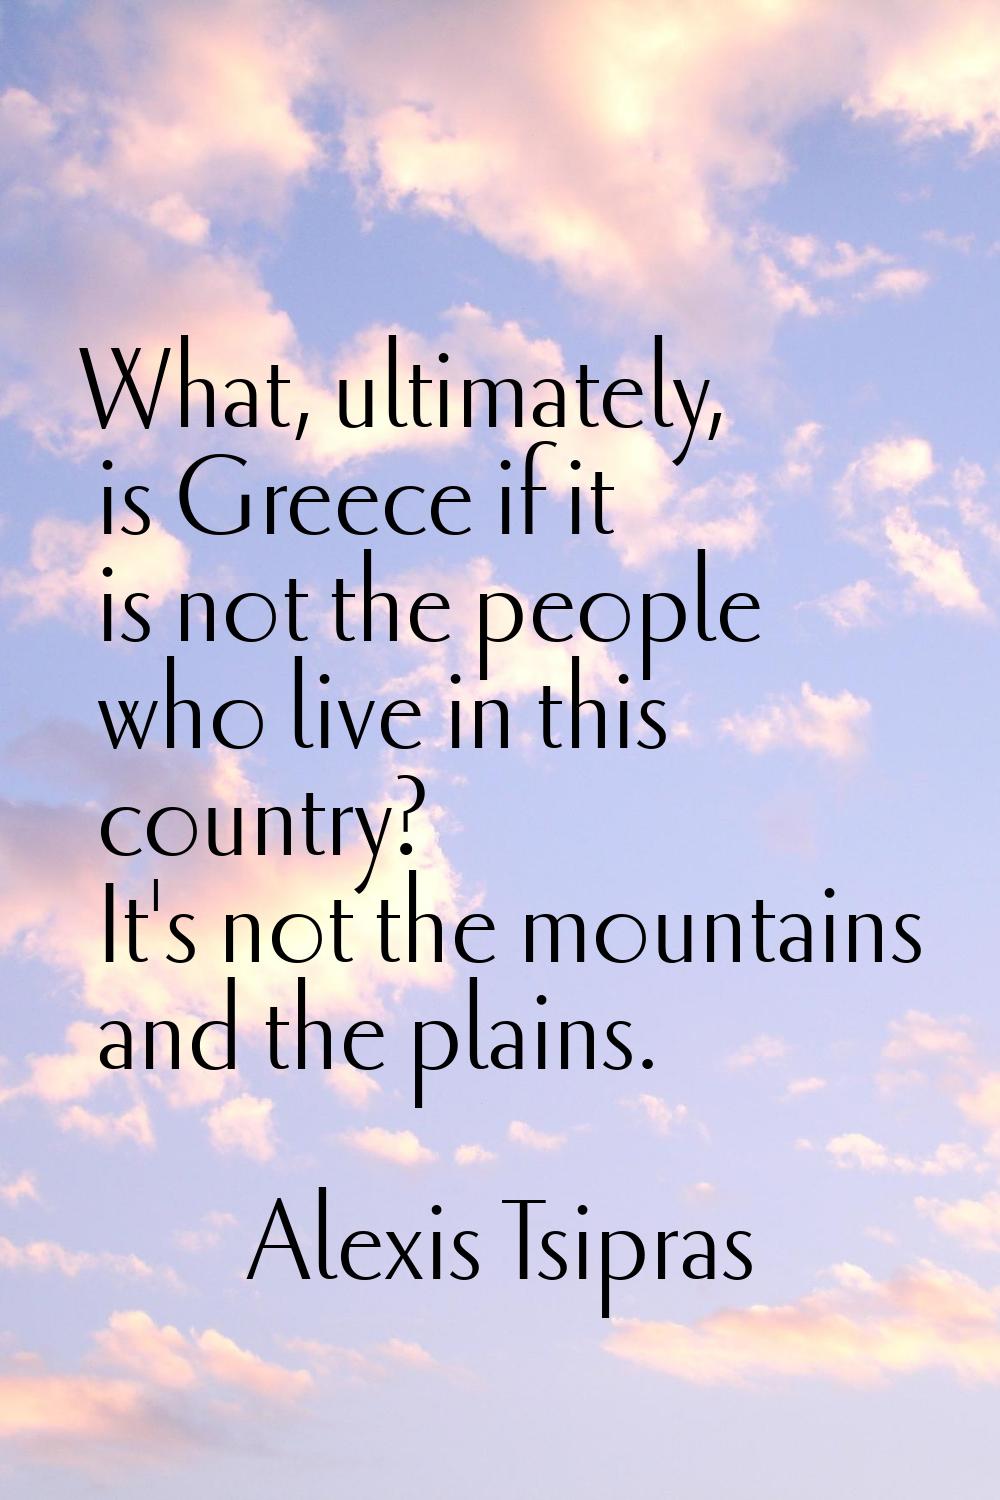 What, ultimately, is Greece if it is not the people who live in this country? It's not the mountain